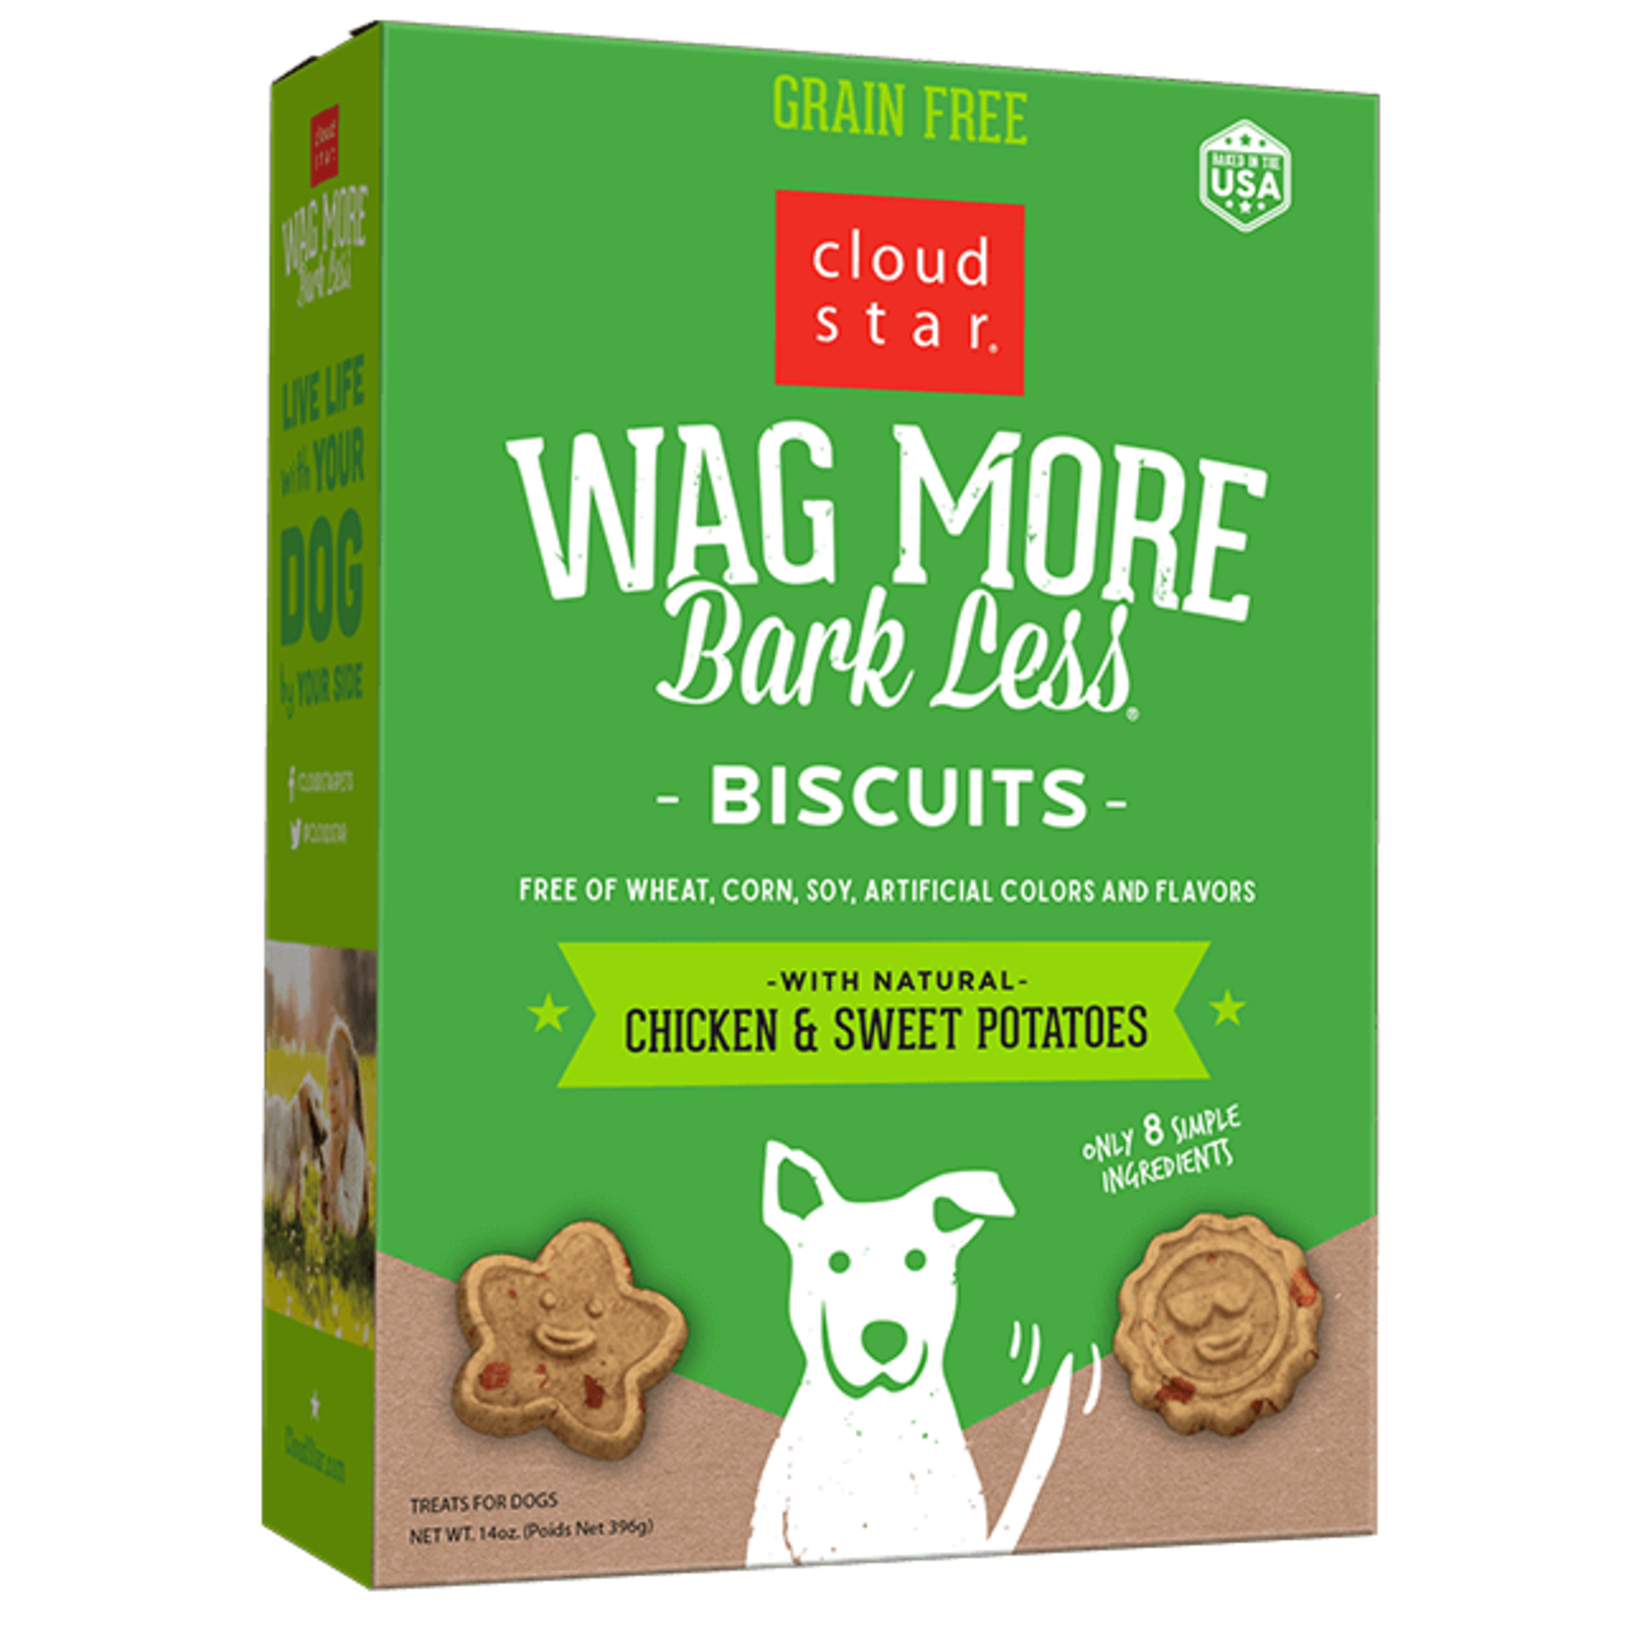 Cloud Star Wag More Bark Less Grain Free Oven Baked Dog Biscuits with Chicken & Sweet Potatoes 14oz